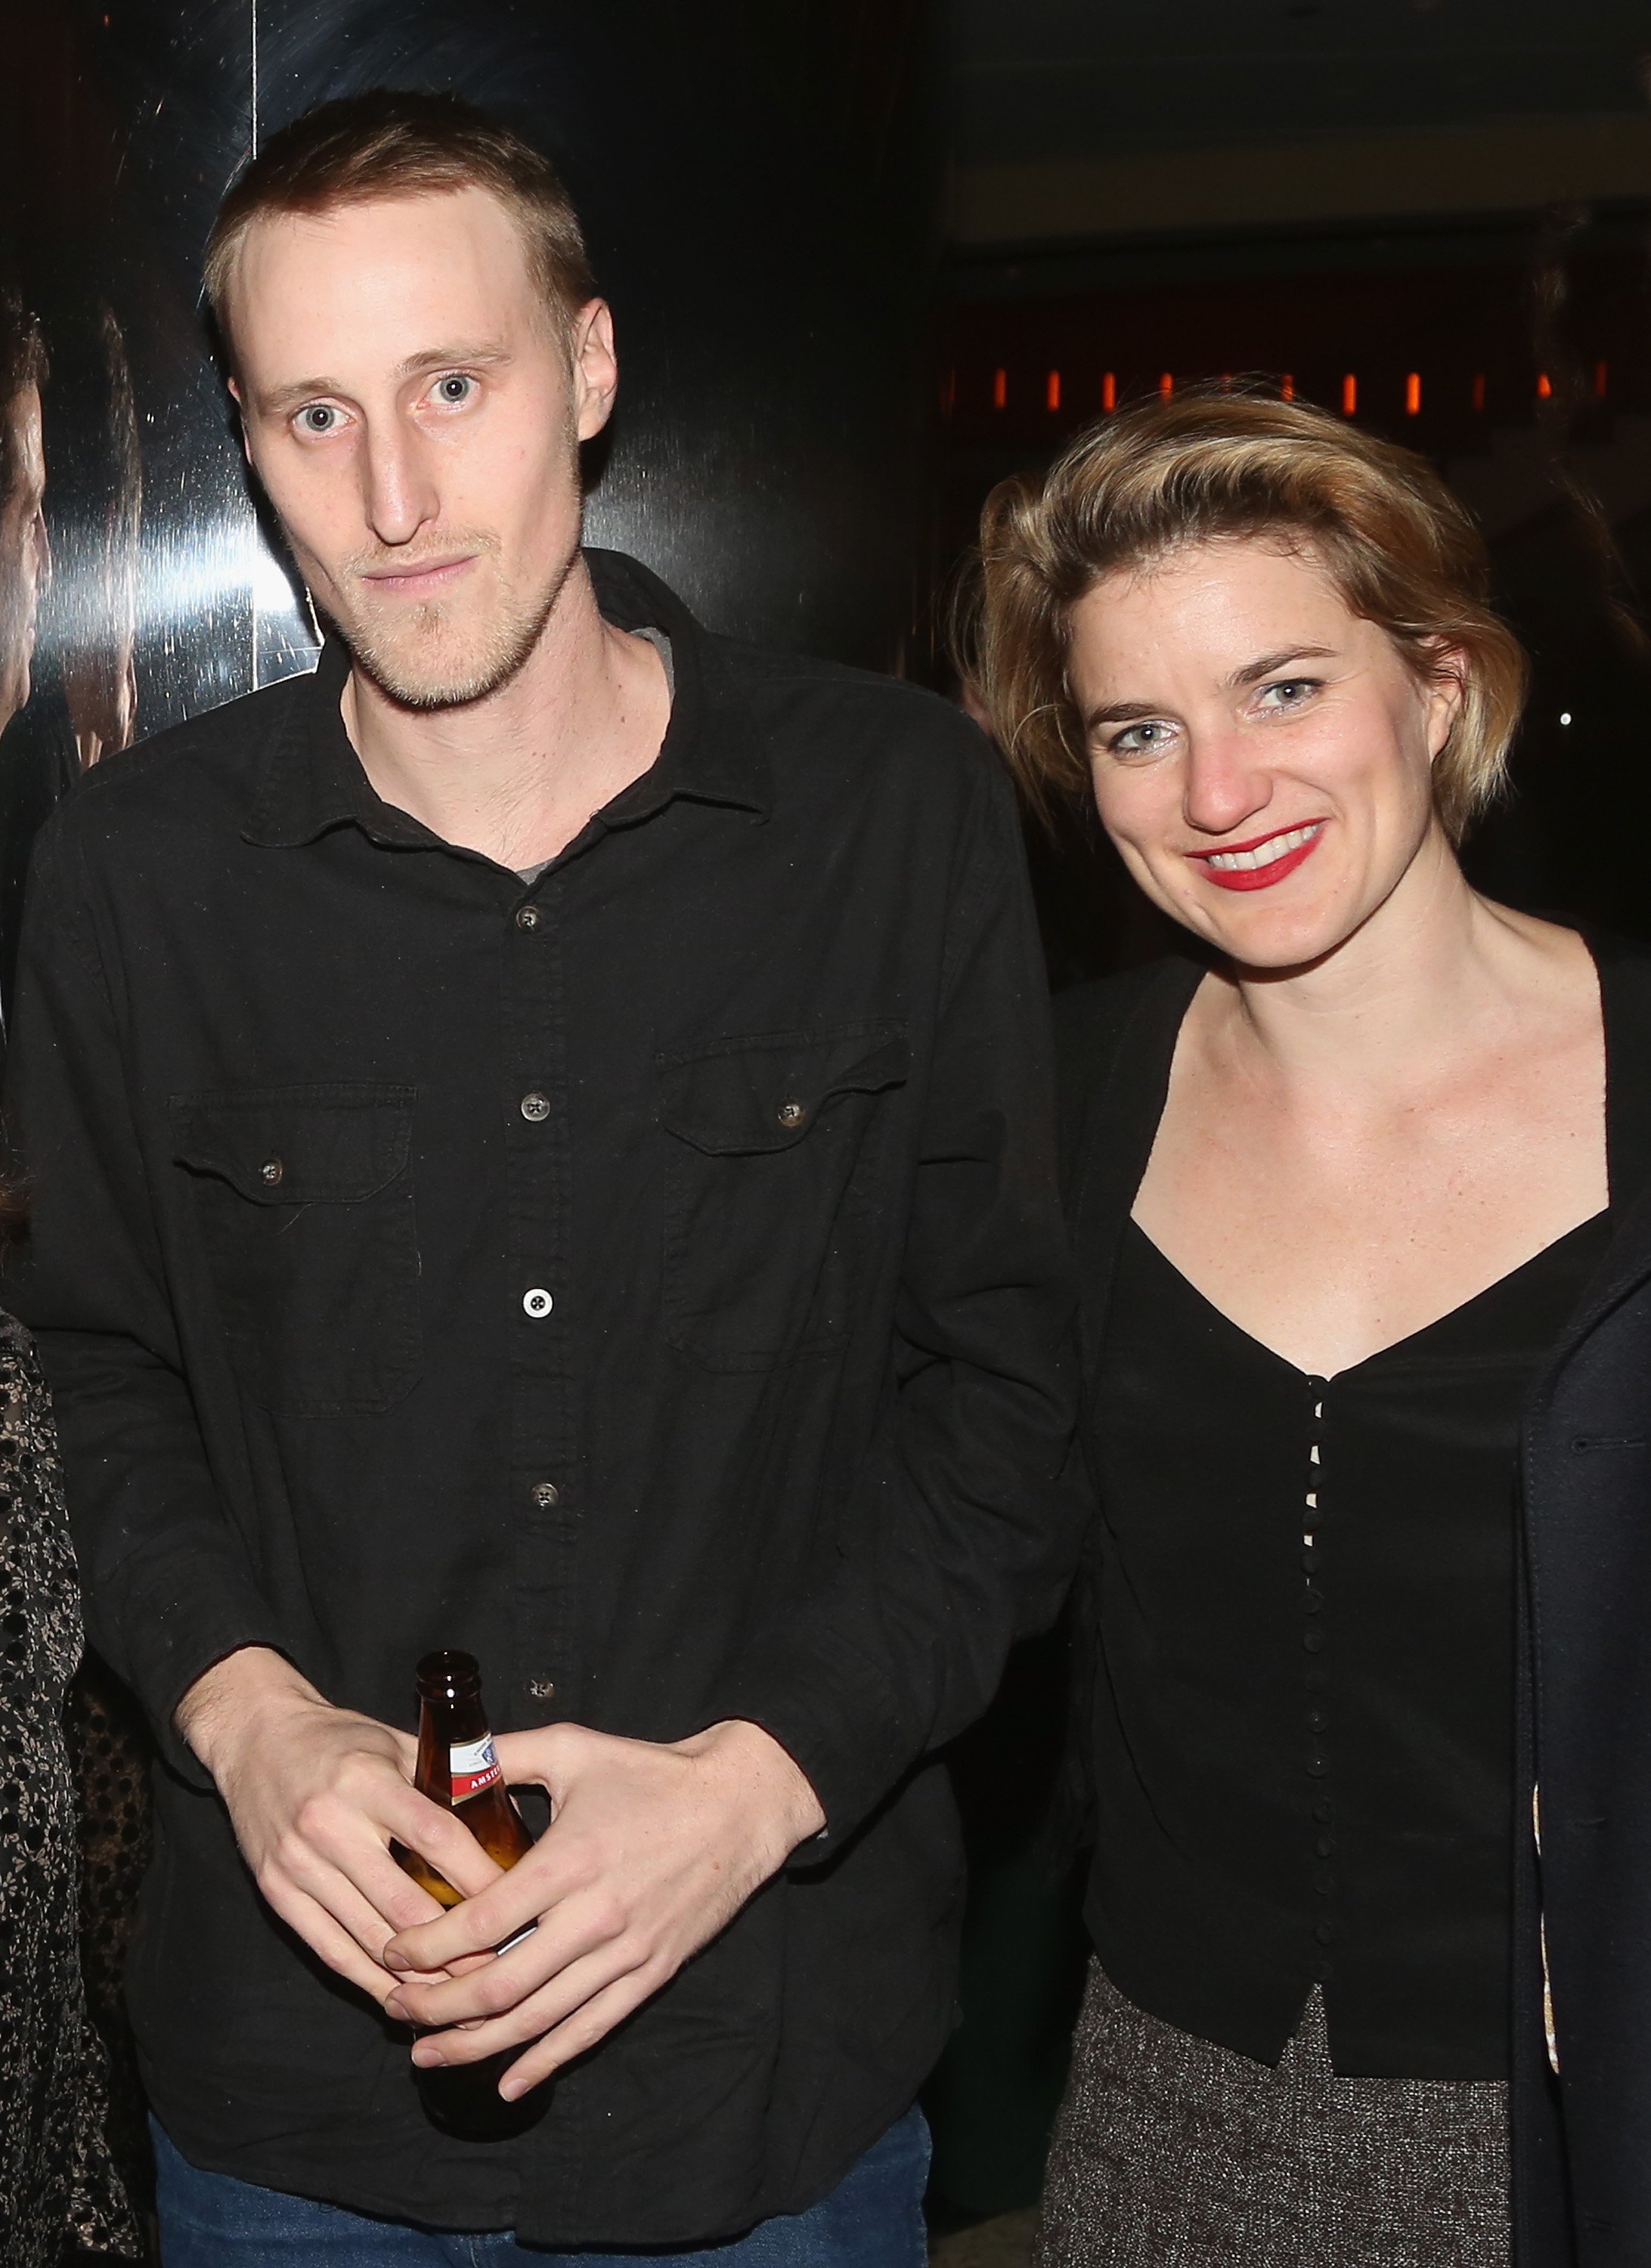  Samuel Walker Shepard and Hannah Jane Shepard (Children of late Playwright Sam Shepard and Jessica Lange) pose at the opening night after party for the Roundabout Theatre Company's production of Sam Shepard's "True West" on Broadway at Brasserie 8 1/2 on January 24, 2019 in New York City. | Source: Getty Images